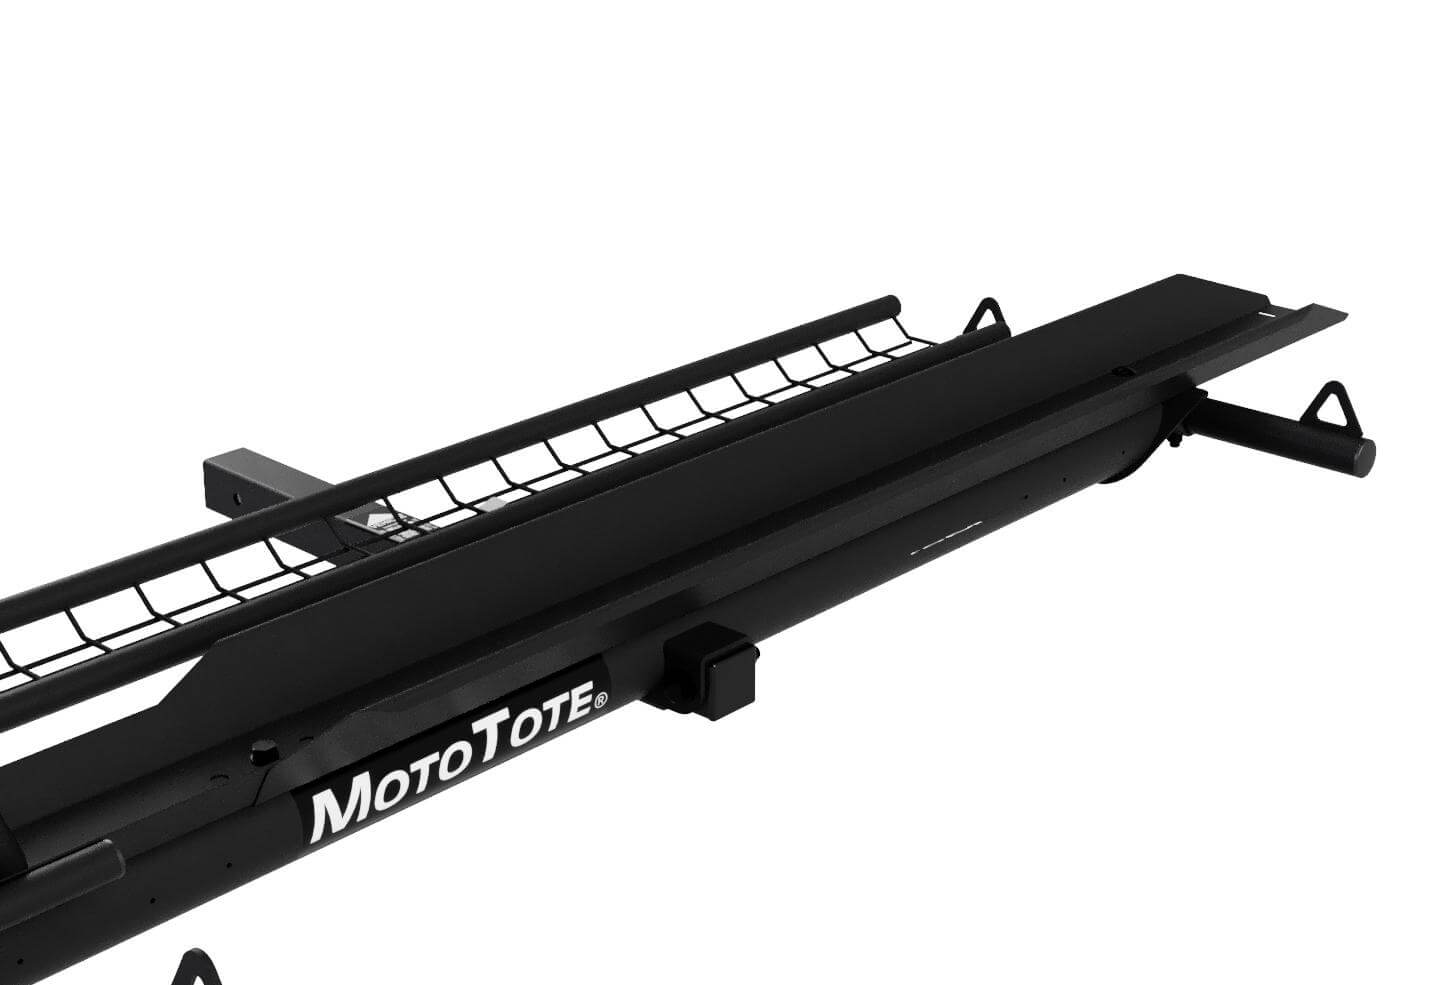 MotoTote m3 Trailer Hitch Motorcycle Carrier - Angled Steel Track